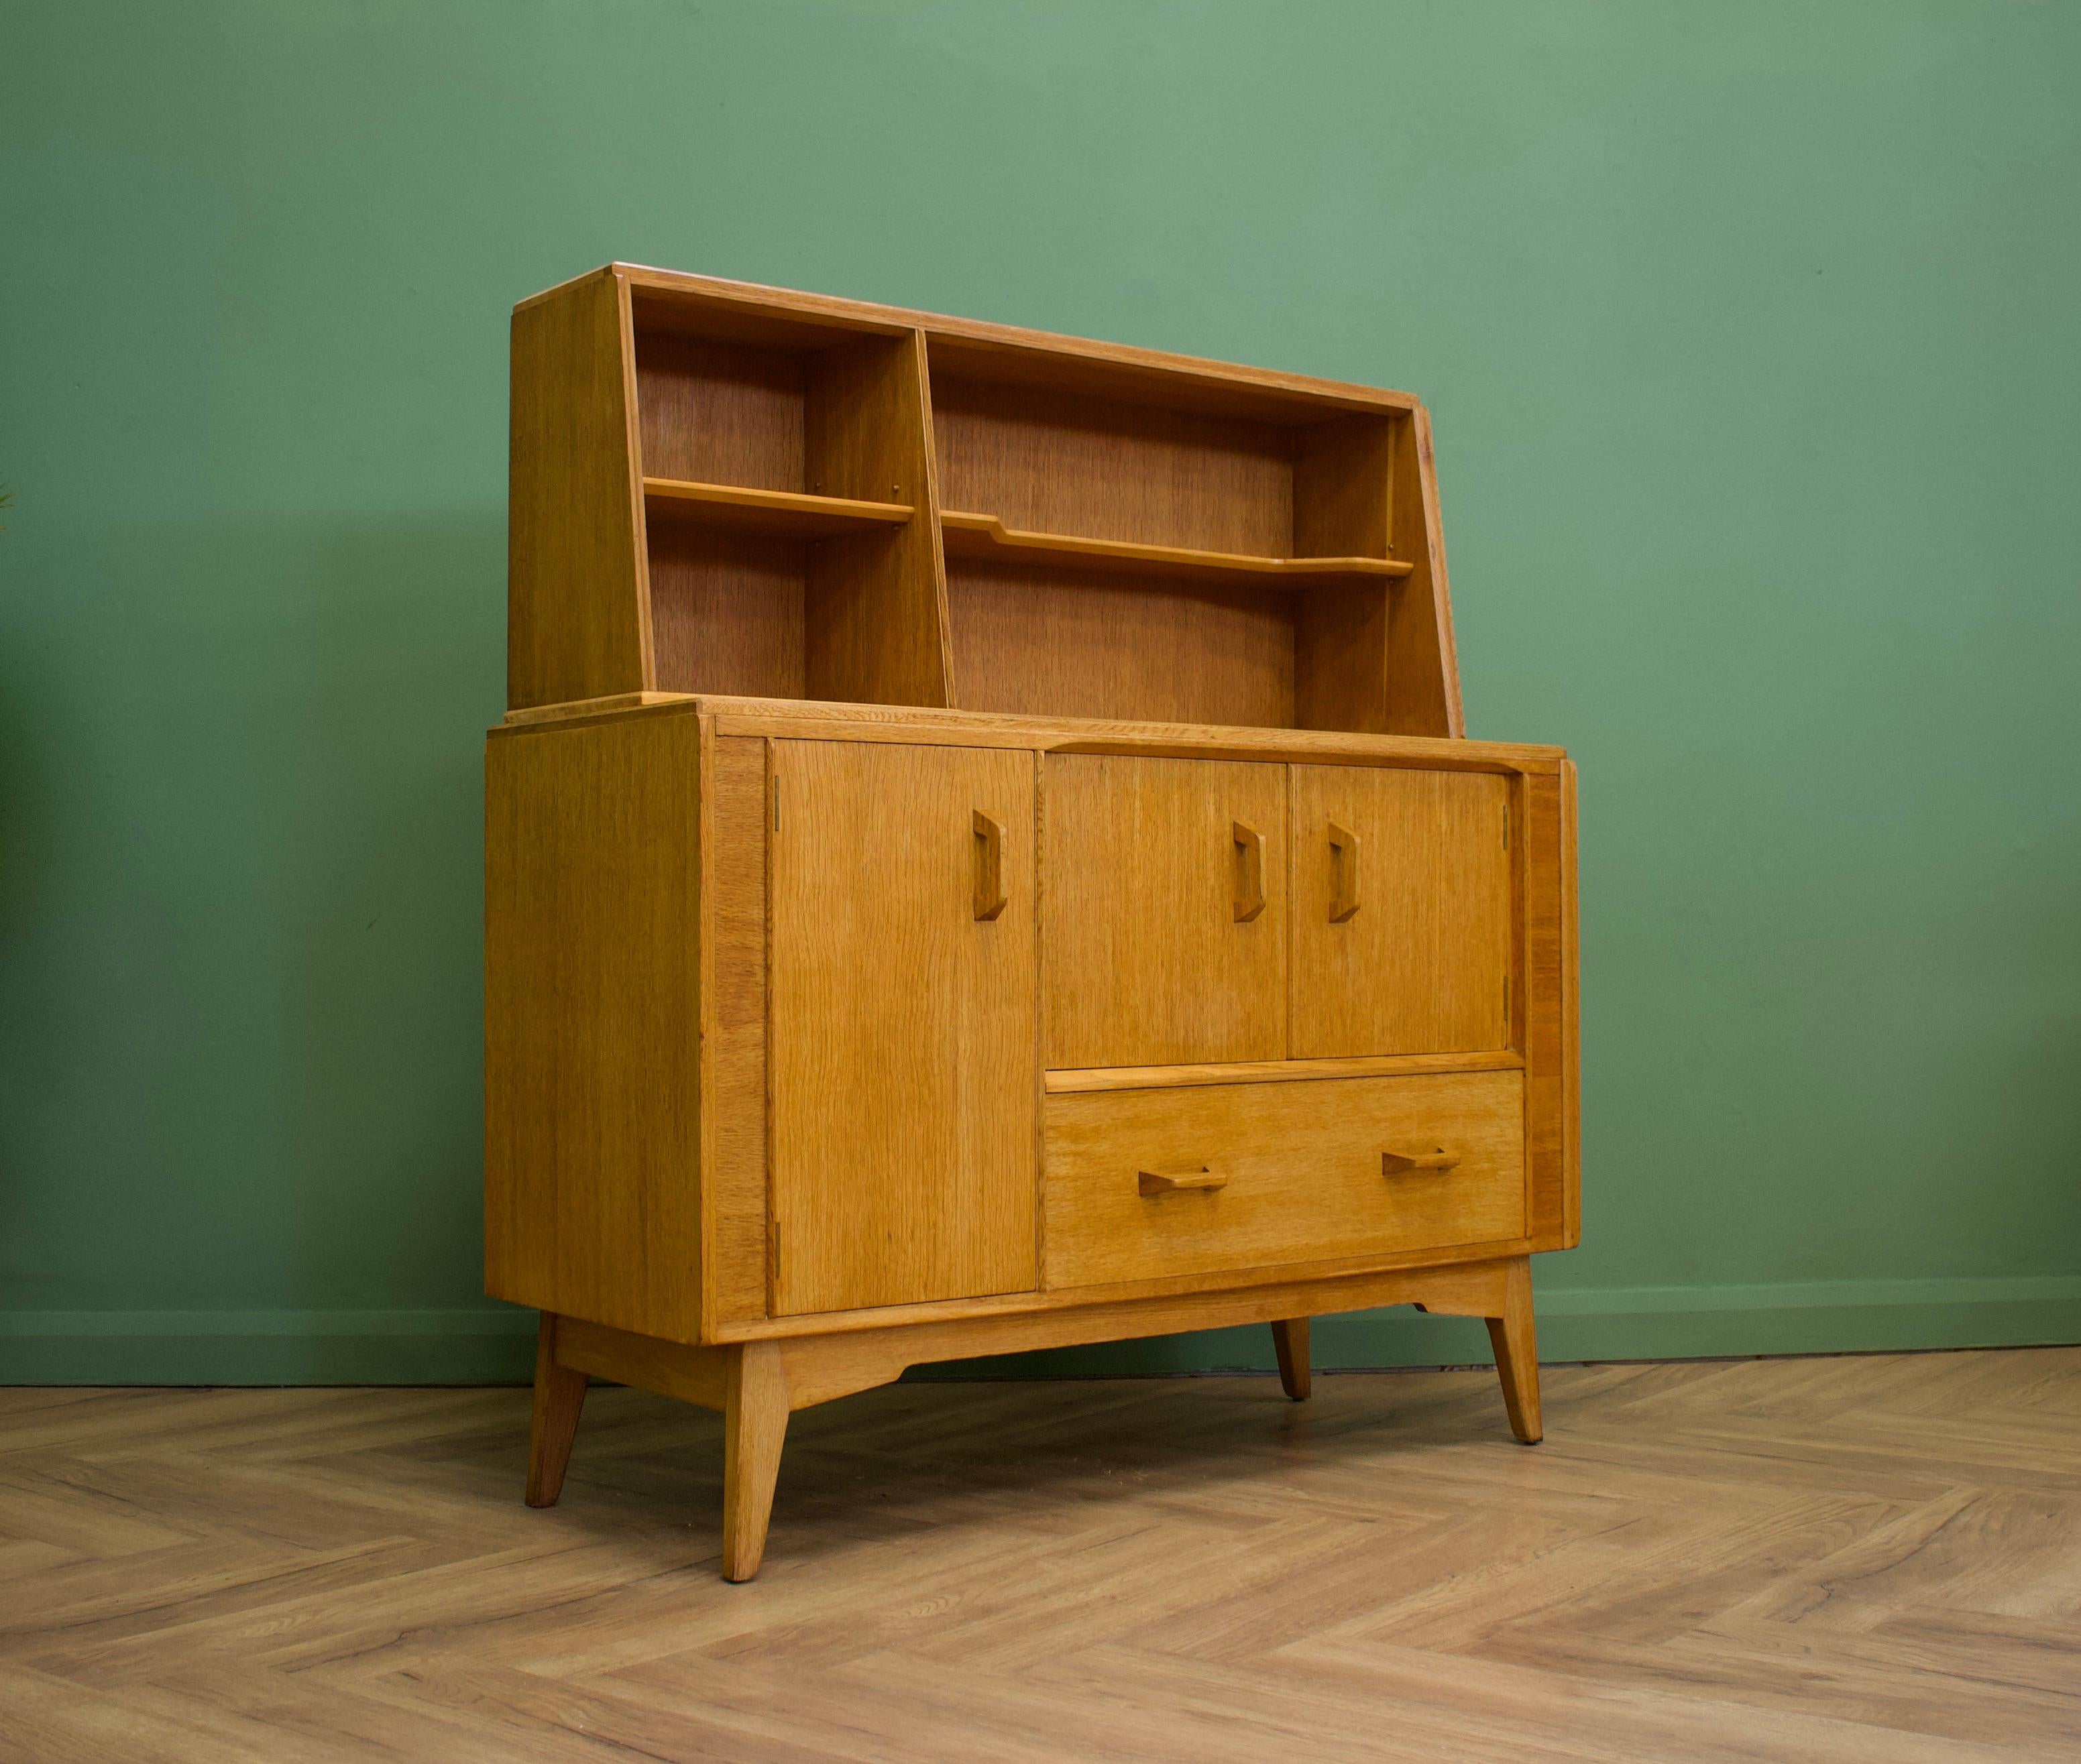 A midcentury oak sideboard from G Plan - from the Brandon range.

Featuring a drawer, two cupboards and shelves to the top.

The top section is removable, but there lighter mark where it sits.